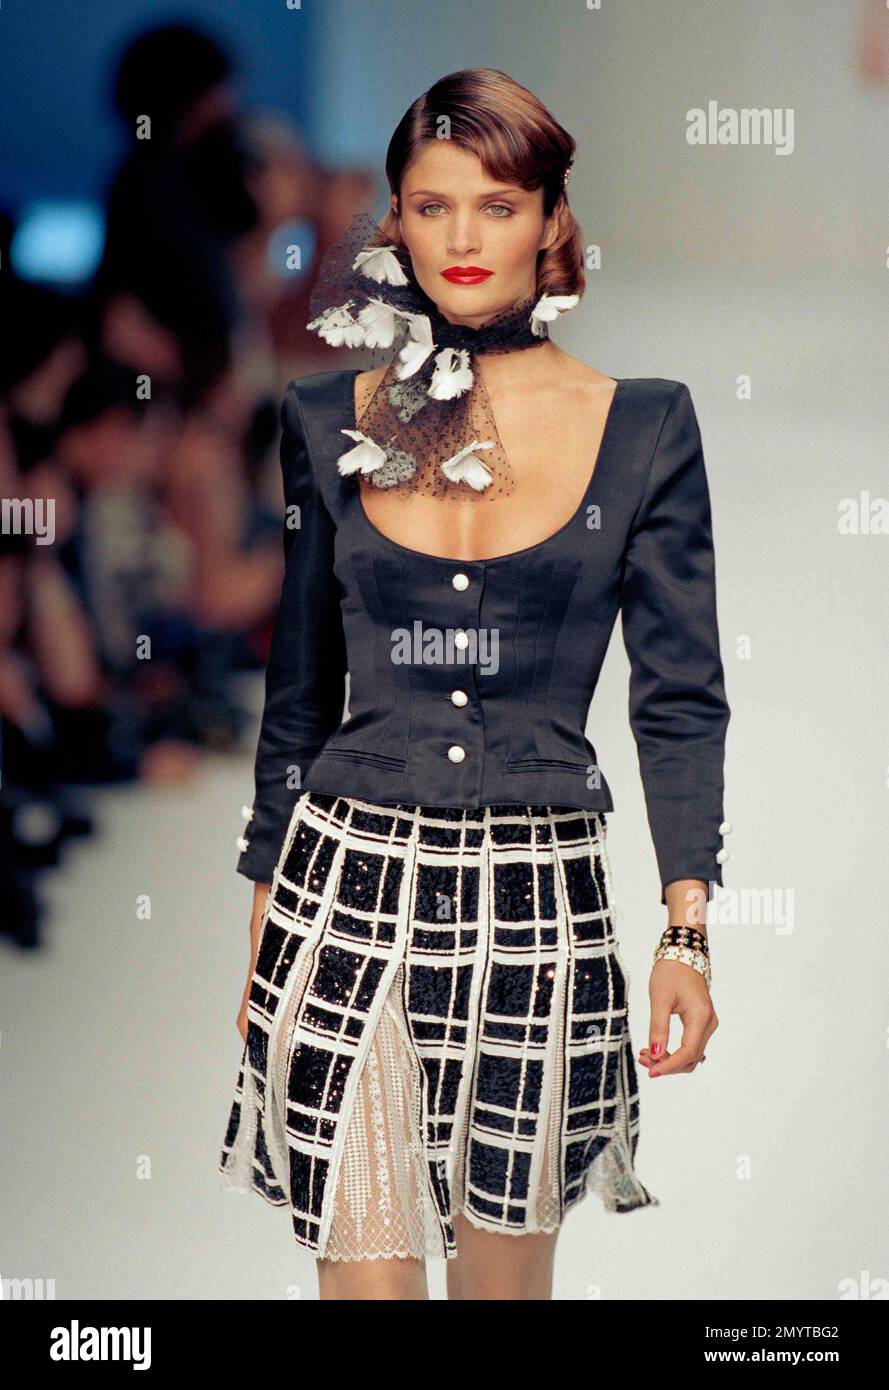 Danish top model Helena Christensen presents a black and white plaid skirt  with a short black jacket as part of Valentino's 1995 spring-summer ready -to-wear fashion collection in Paris, Oct. 16, 1994. (AP